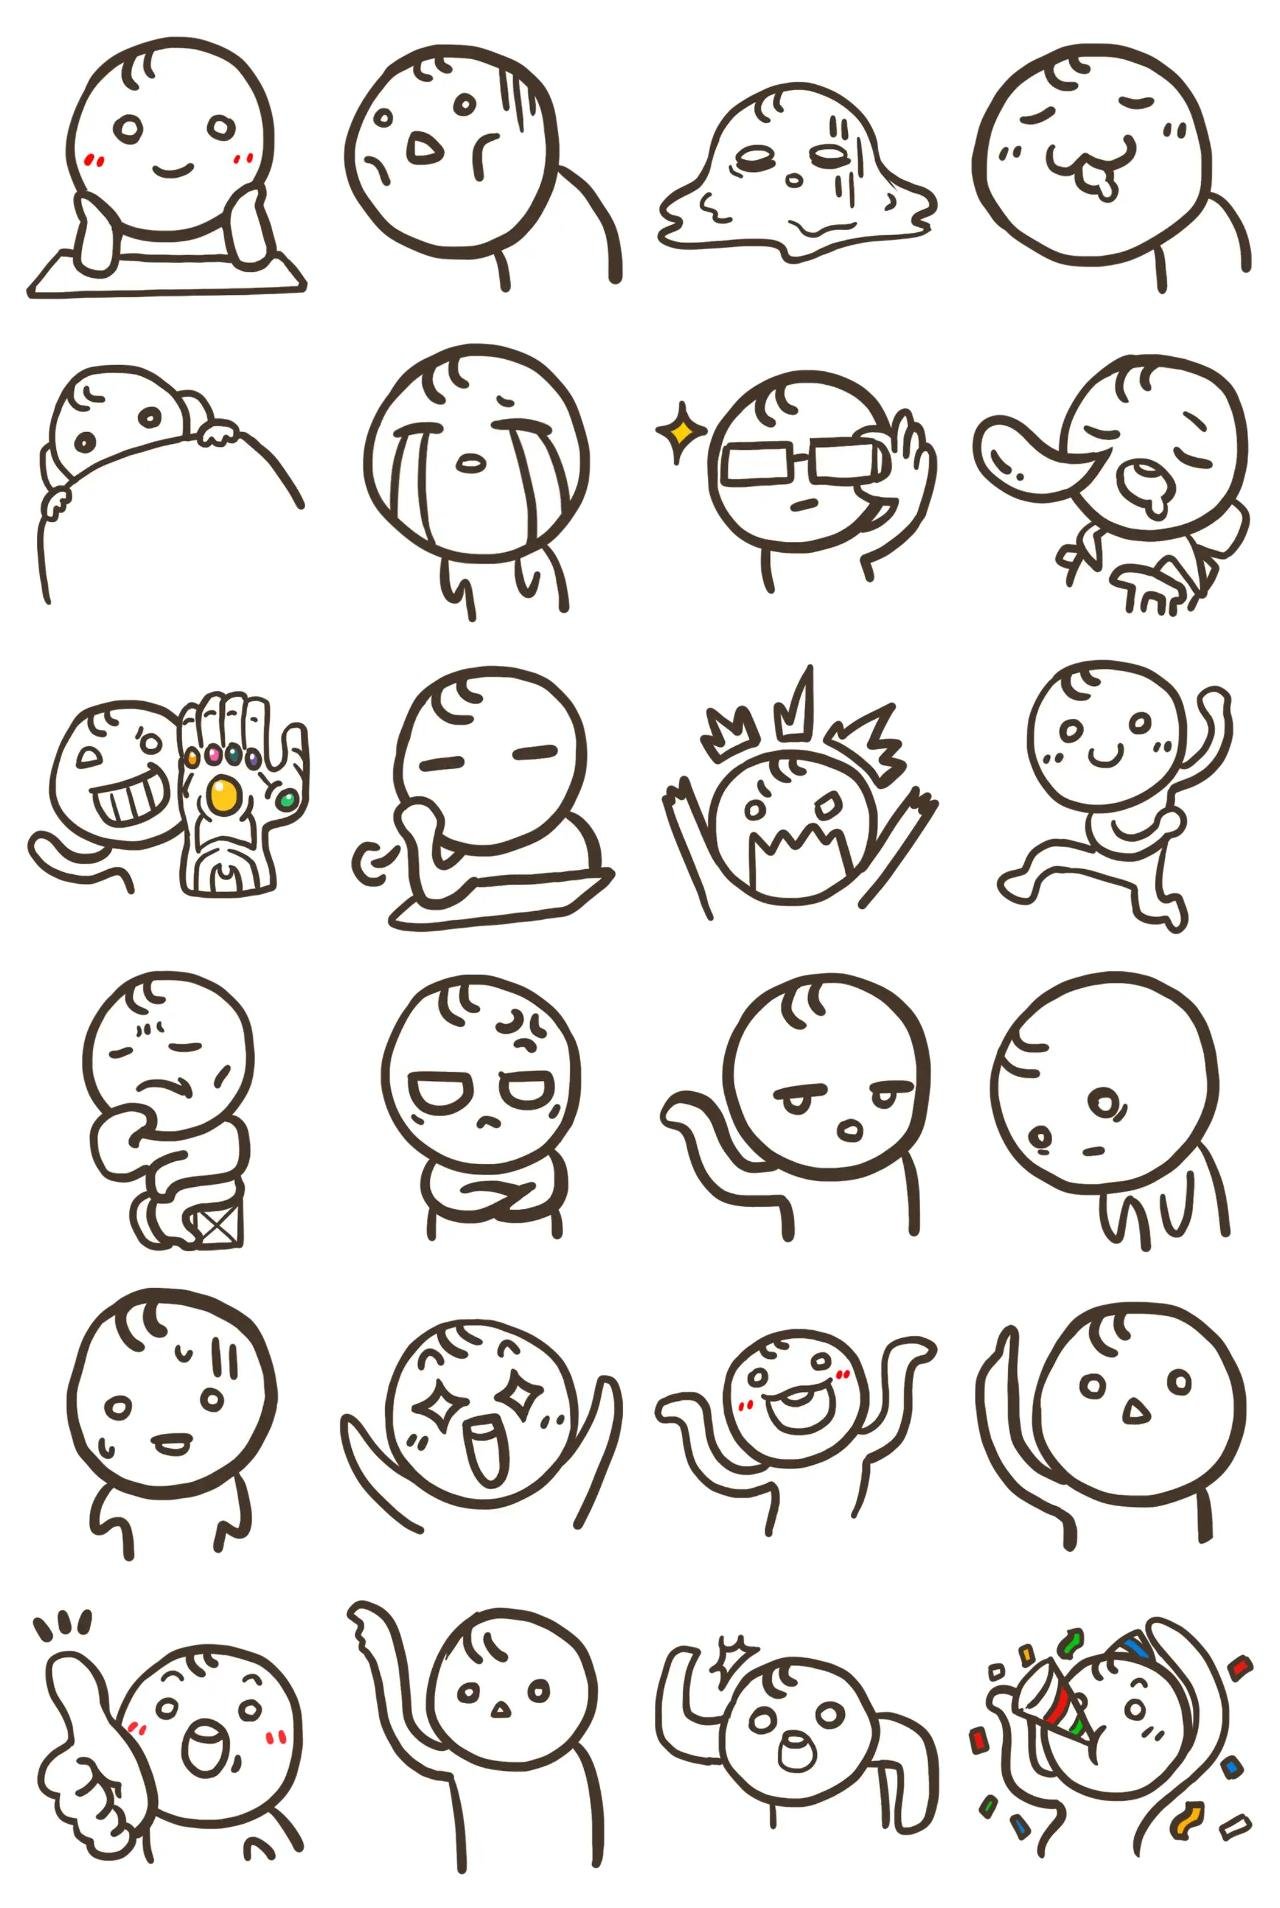 Funny round face emoticon Gag,People sticker pack for Whatsapp, Telegram, Signal, and others chatting and message apps